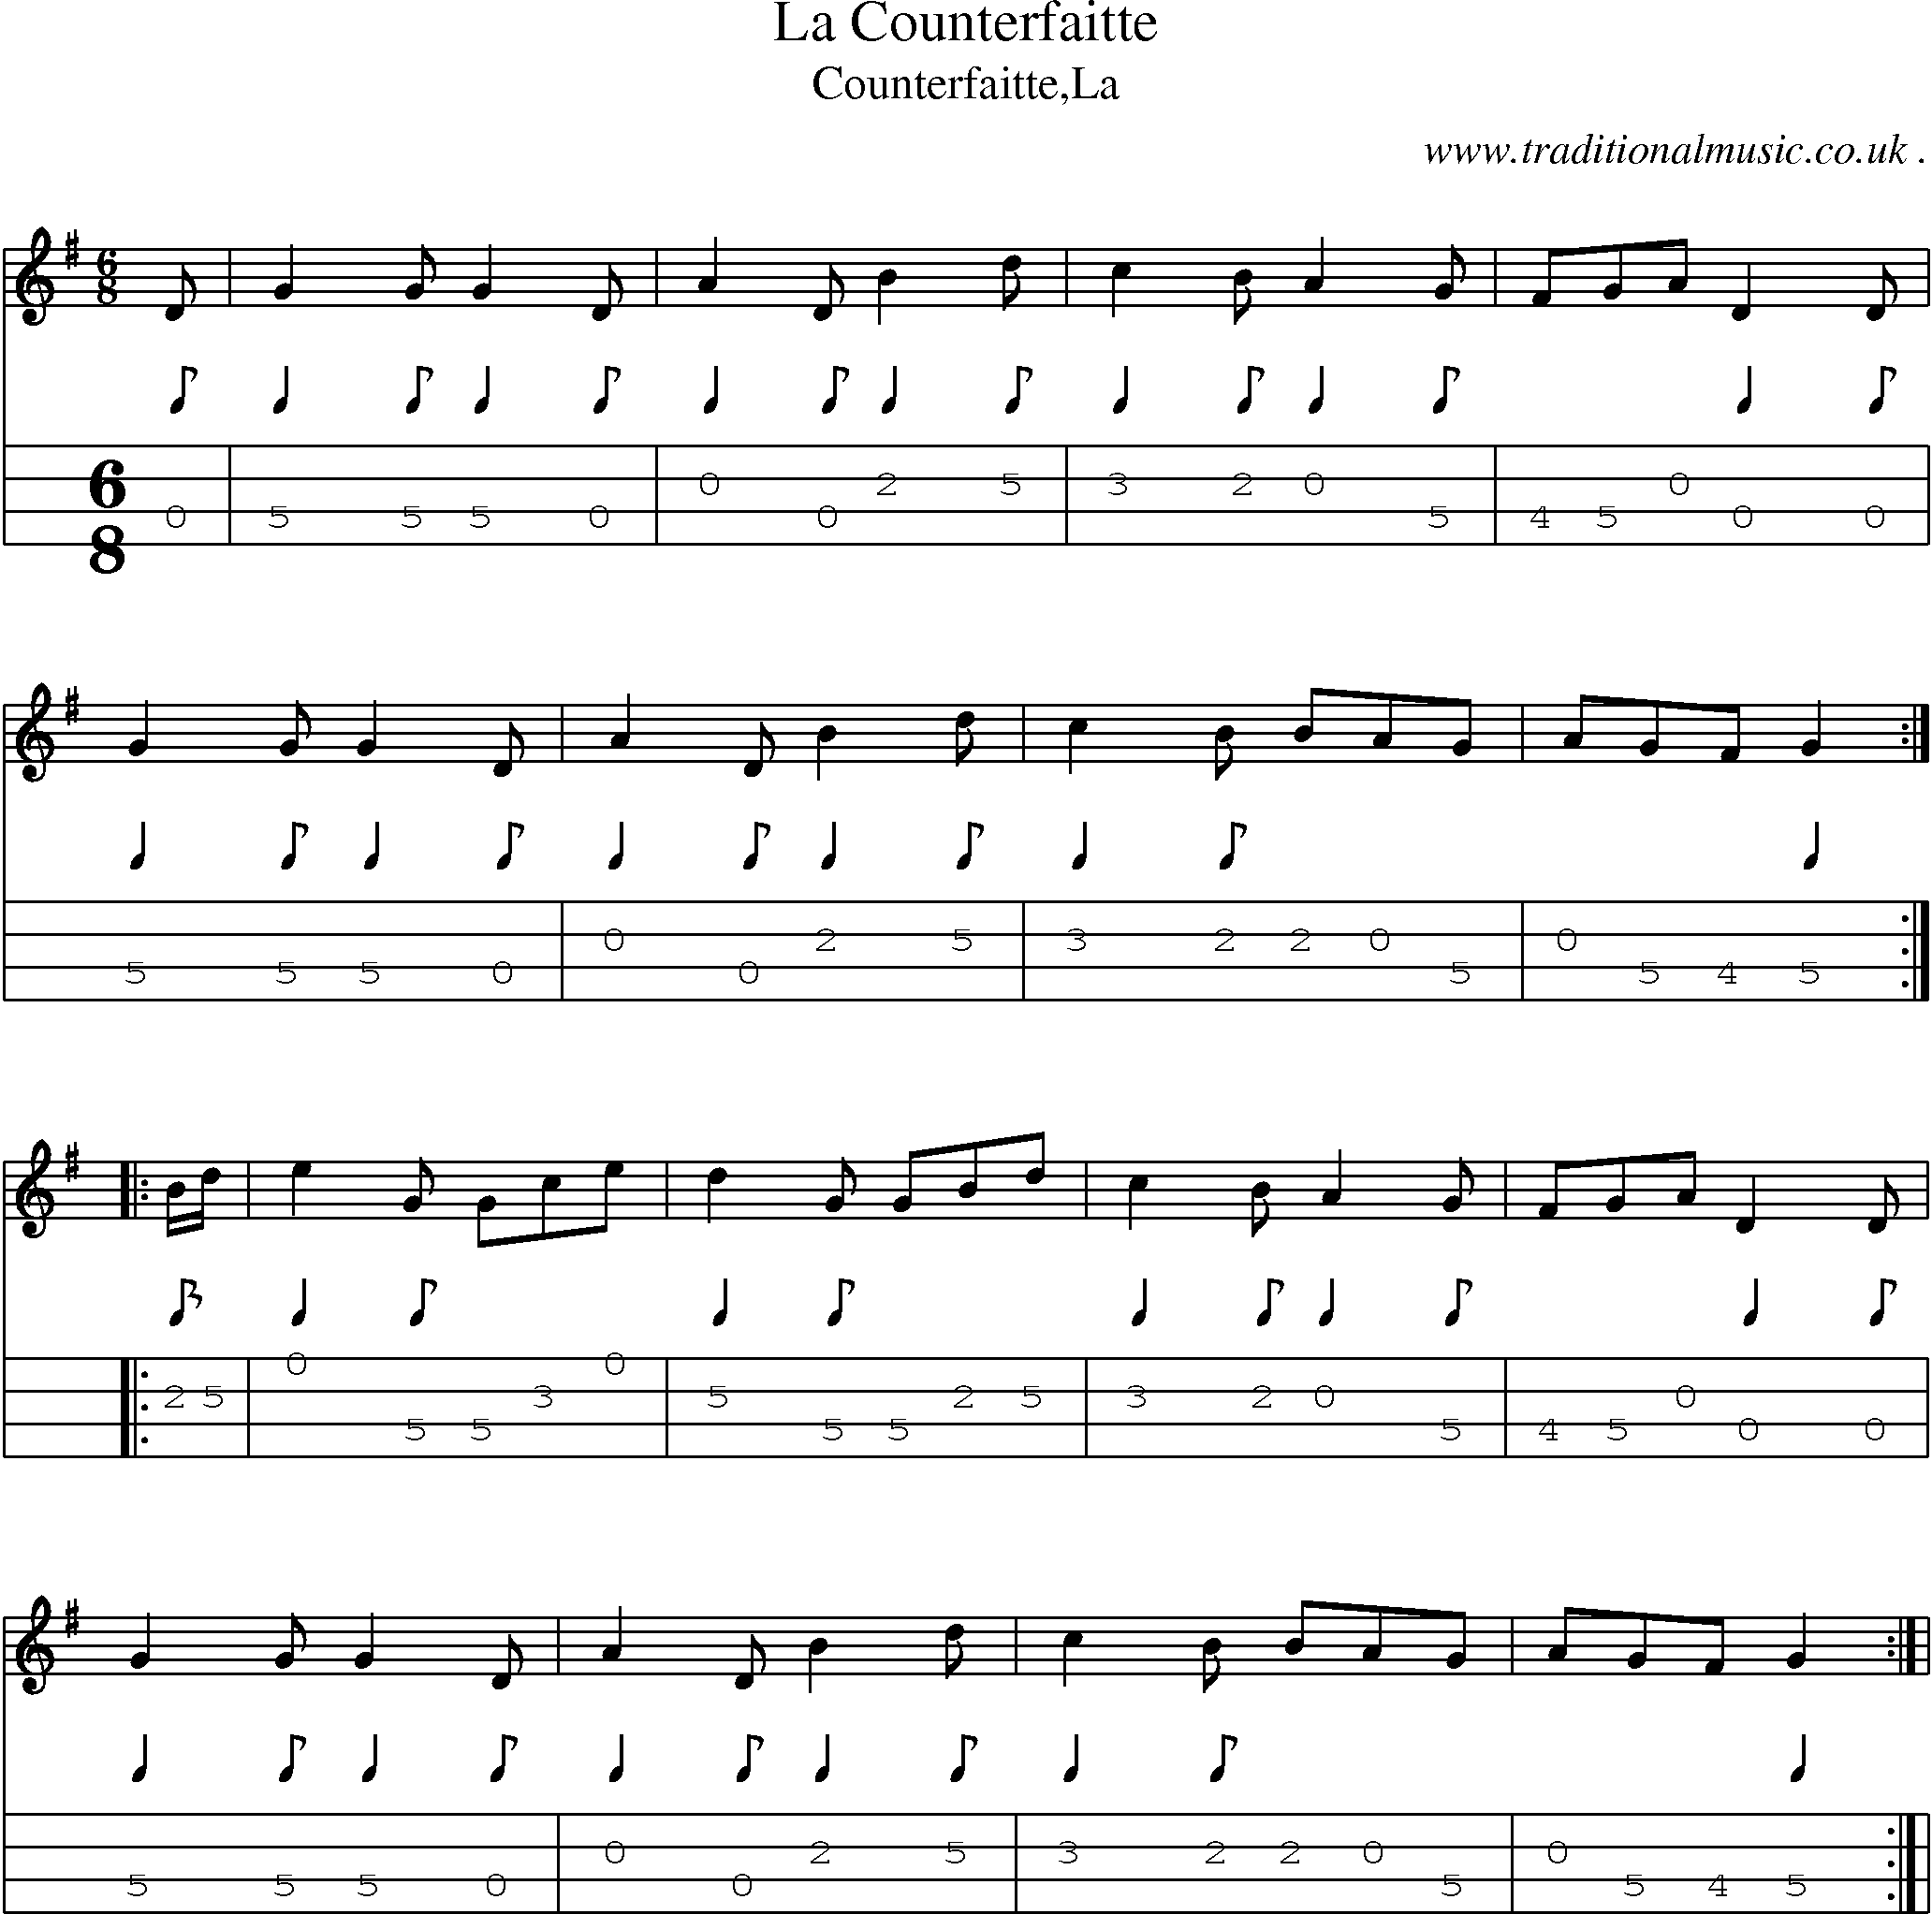 Sheet-Music and Mandolin Tabs for La Counterfaitte